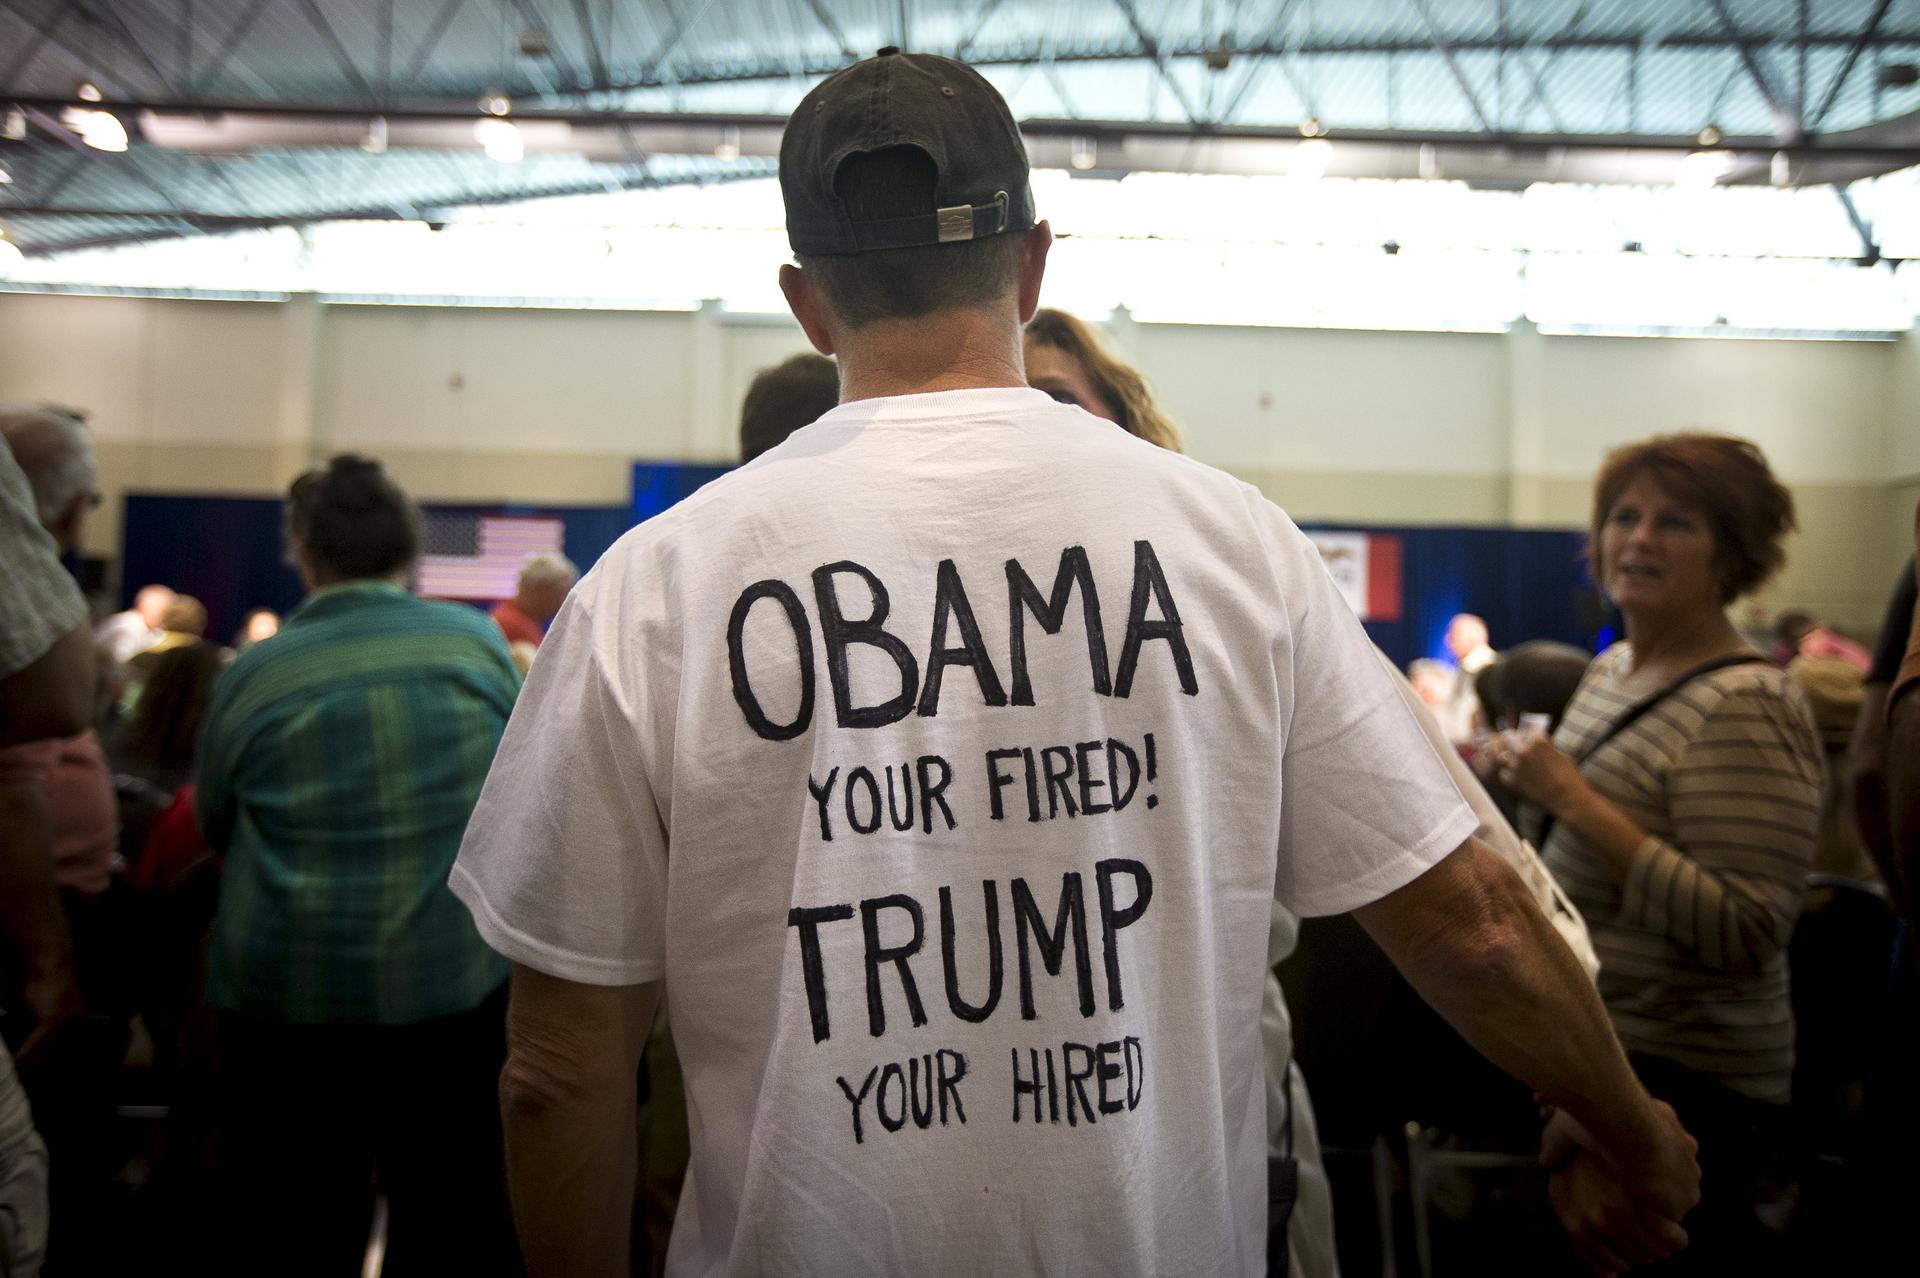 A Trump supporter at a "Make America Great Again" rally. Photo: Reuters